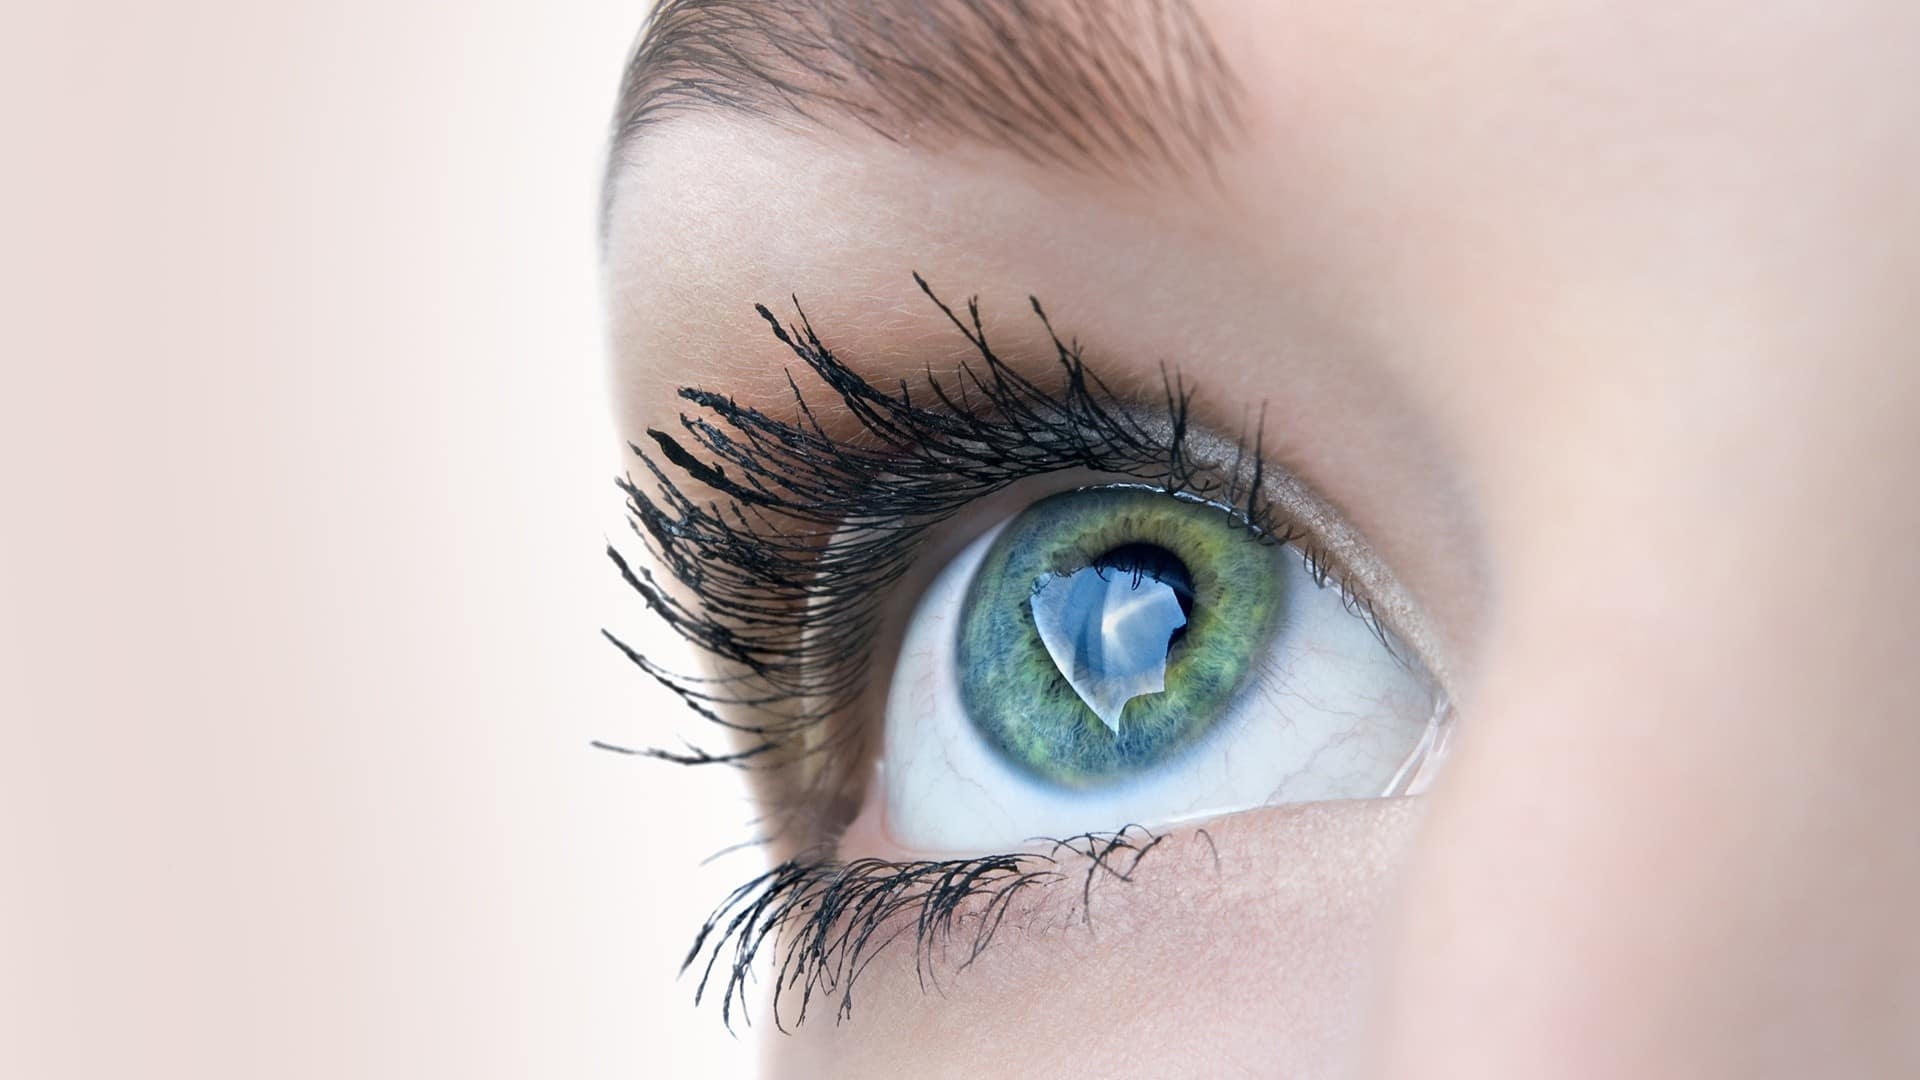 Best Eye Care Tips For This Summer: Keep Your Eyes Moisturized 